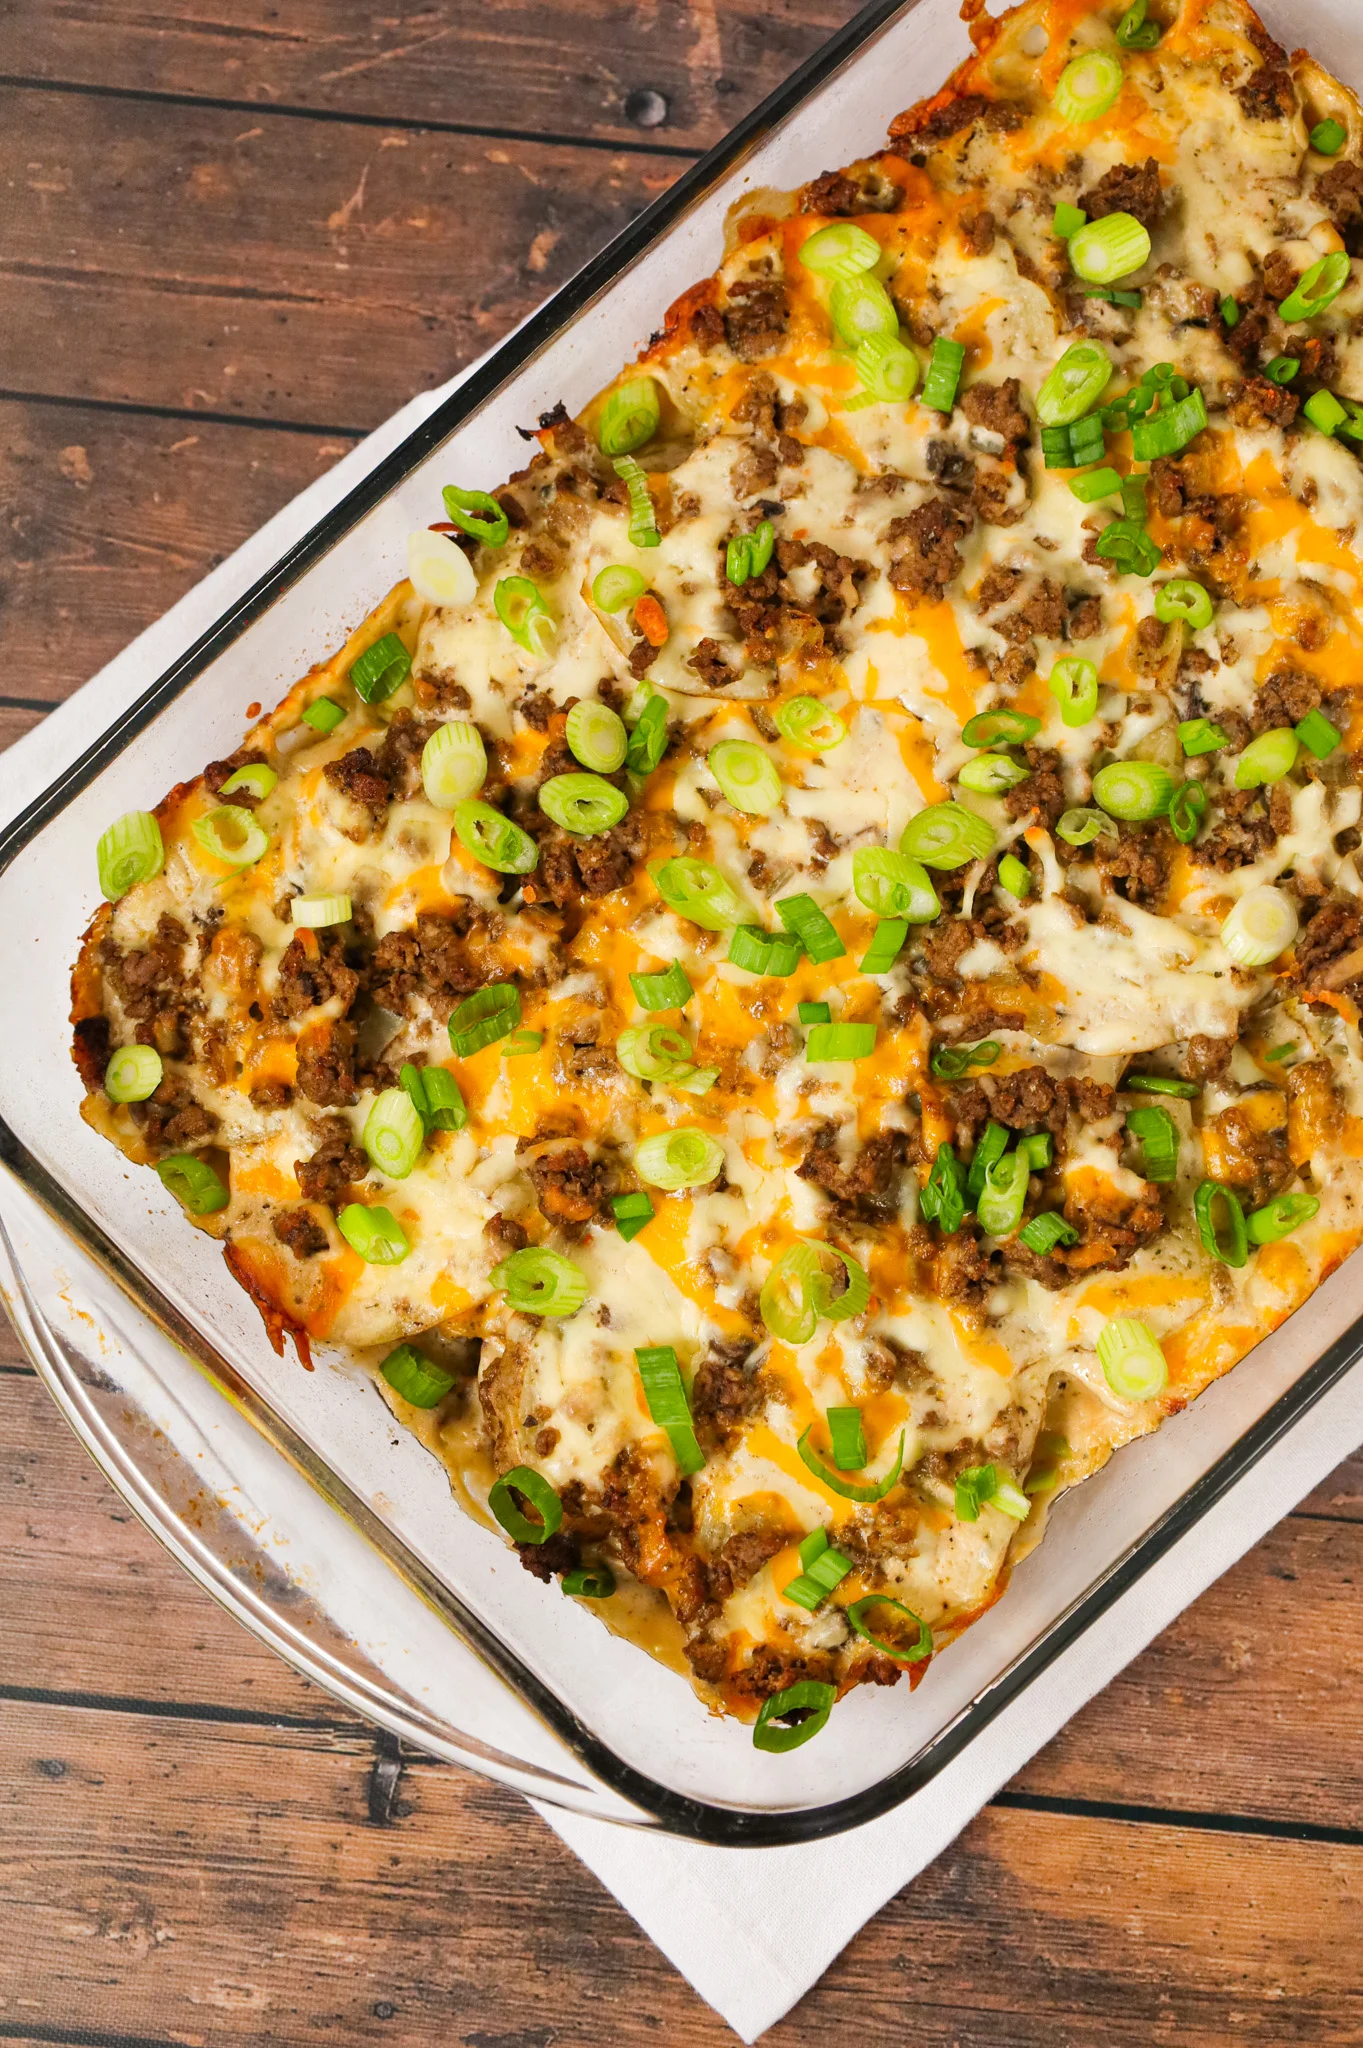 Hamburger Potato Casserole is a hearty dinner recipe with layers of sliced potatoes loaded with crumbled ground beef and shredded cheese all cooked in a cream of mushroom soup and sour cream mixture.